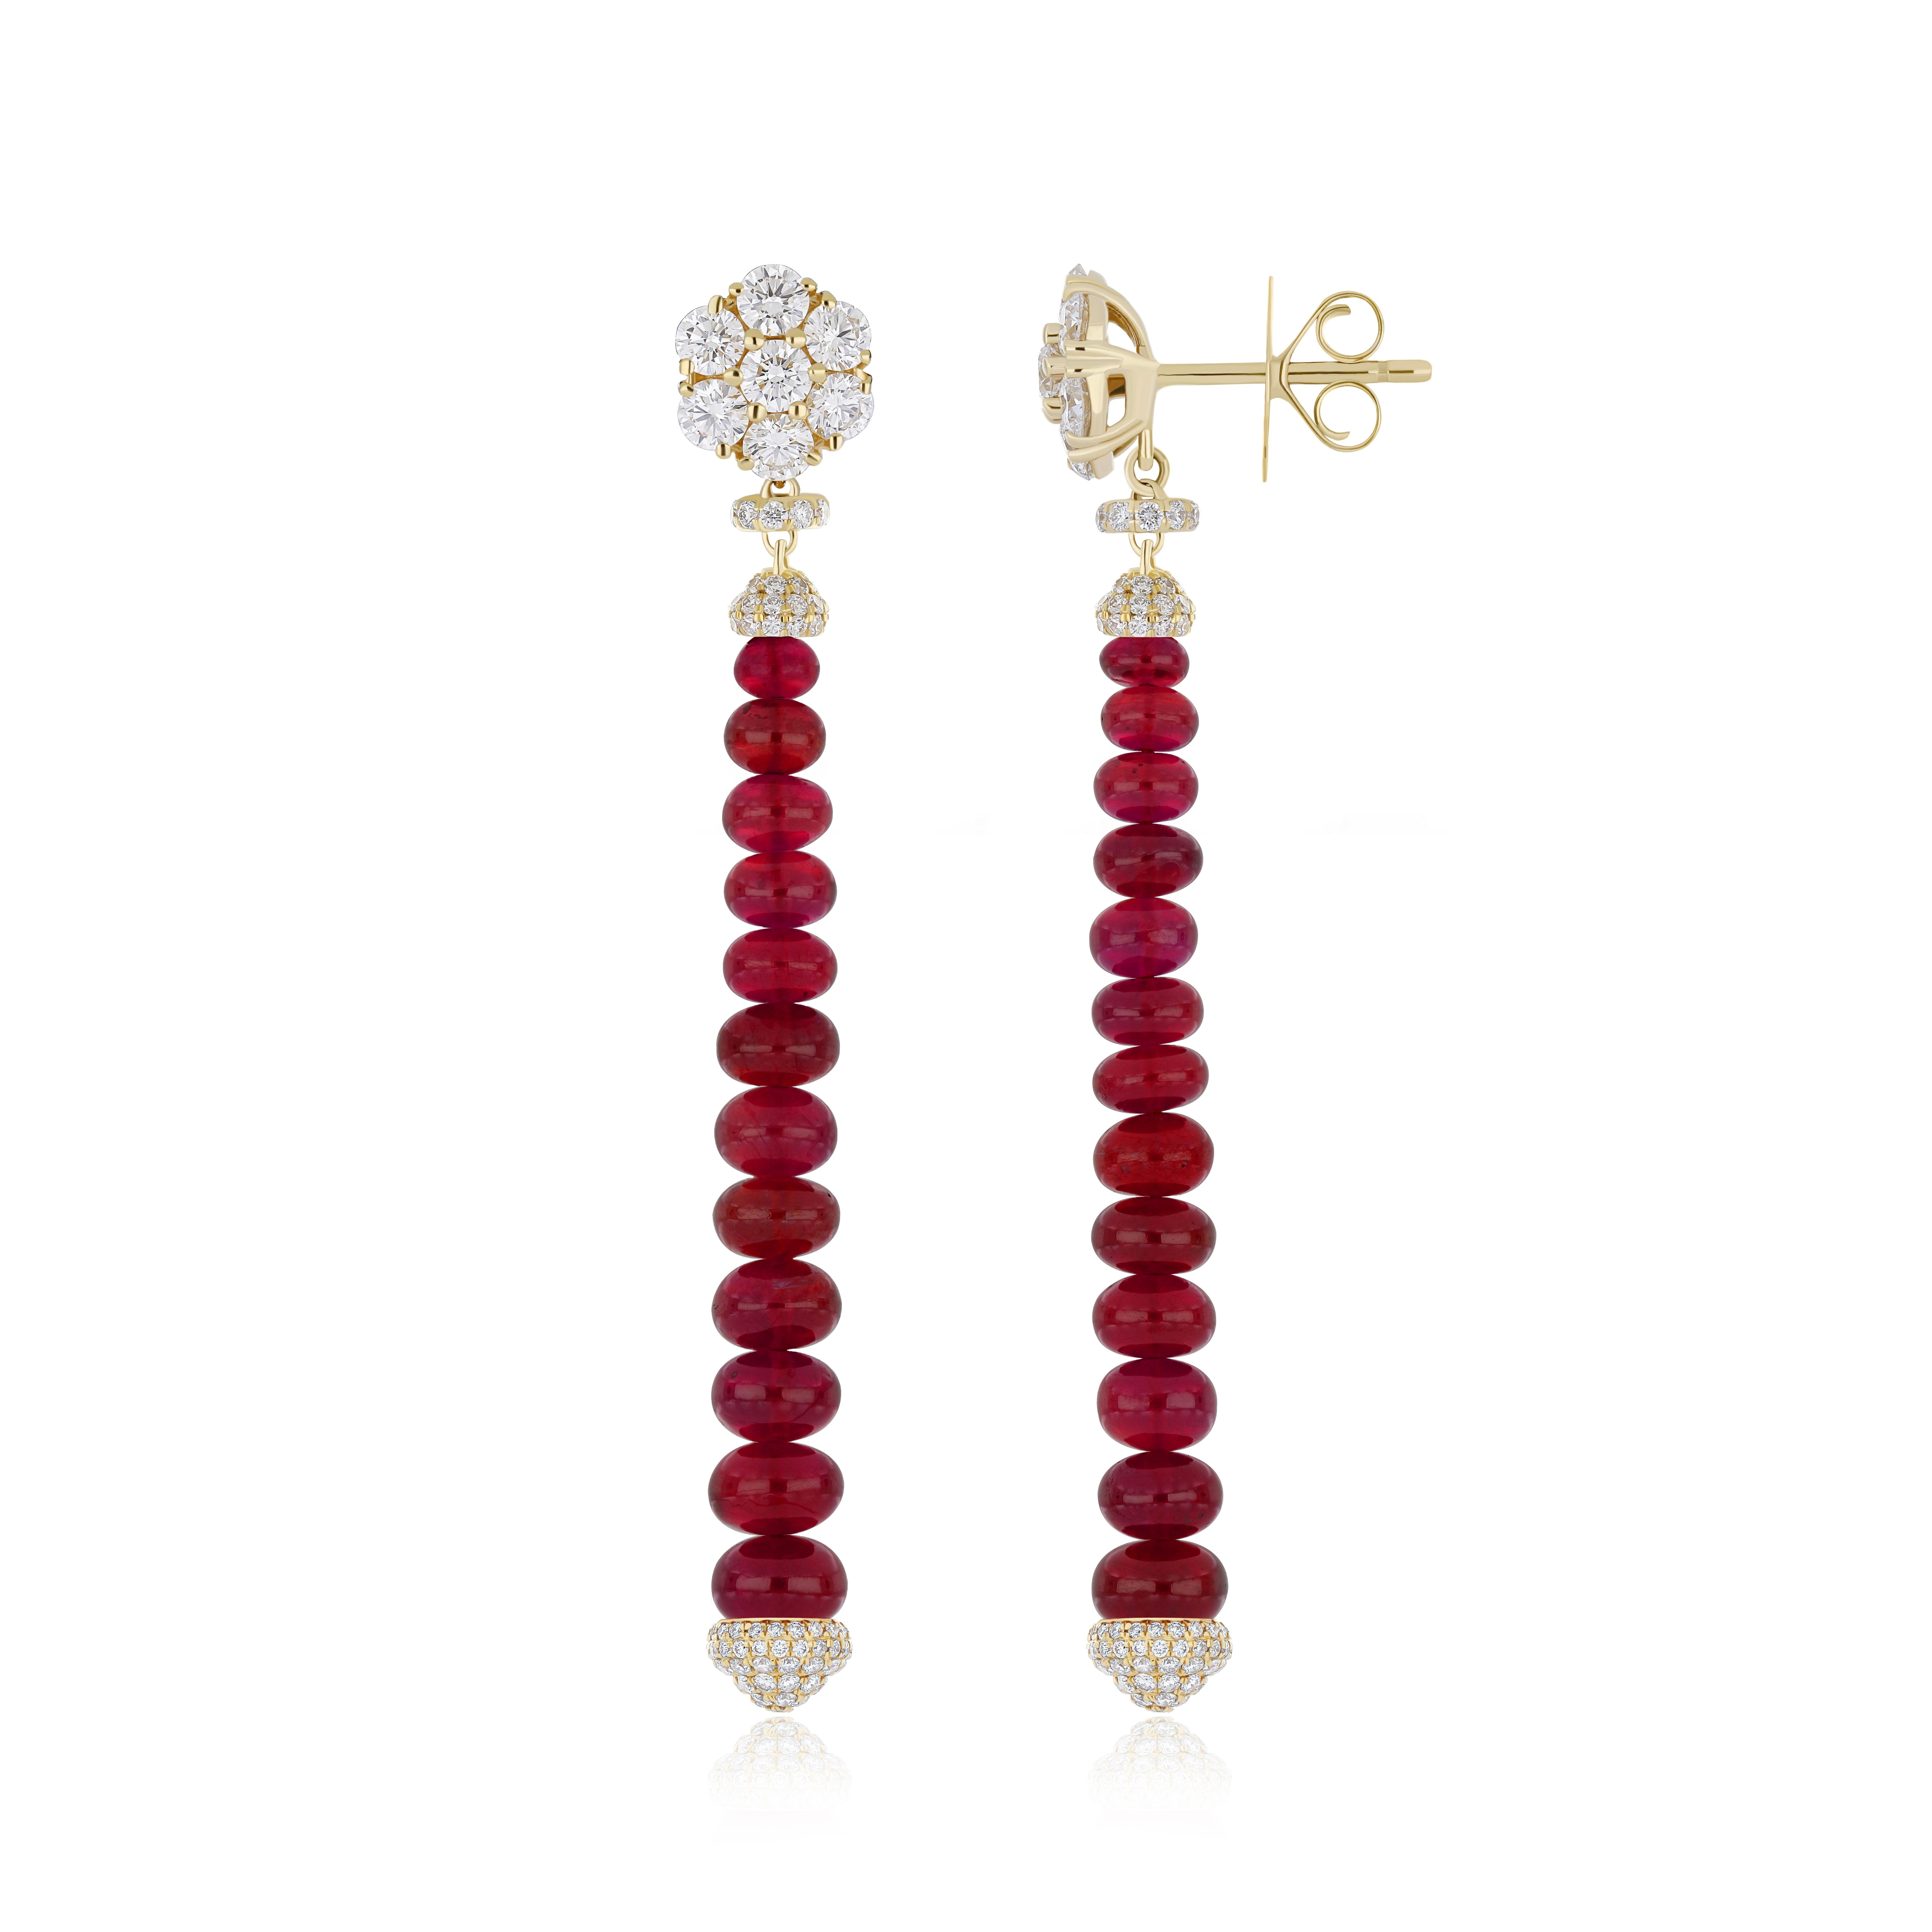 Elegant and Exquisitely Detailed 18 Karat Yellow Gold Earring. Set with with Beautiful Red Ruby weighin approx. 53.13Cts, accented with micro pave set Diamonds approx. 2.16Cts a Beautifully Hand Crafted in 18 Karat Yellow Gold Drop Dangle Beads